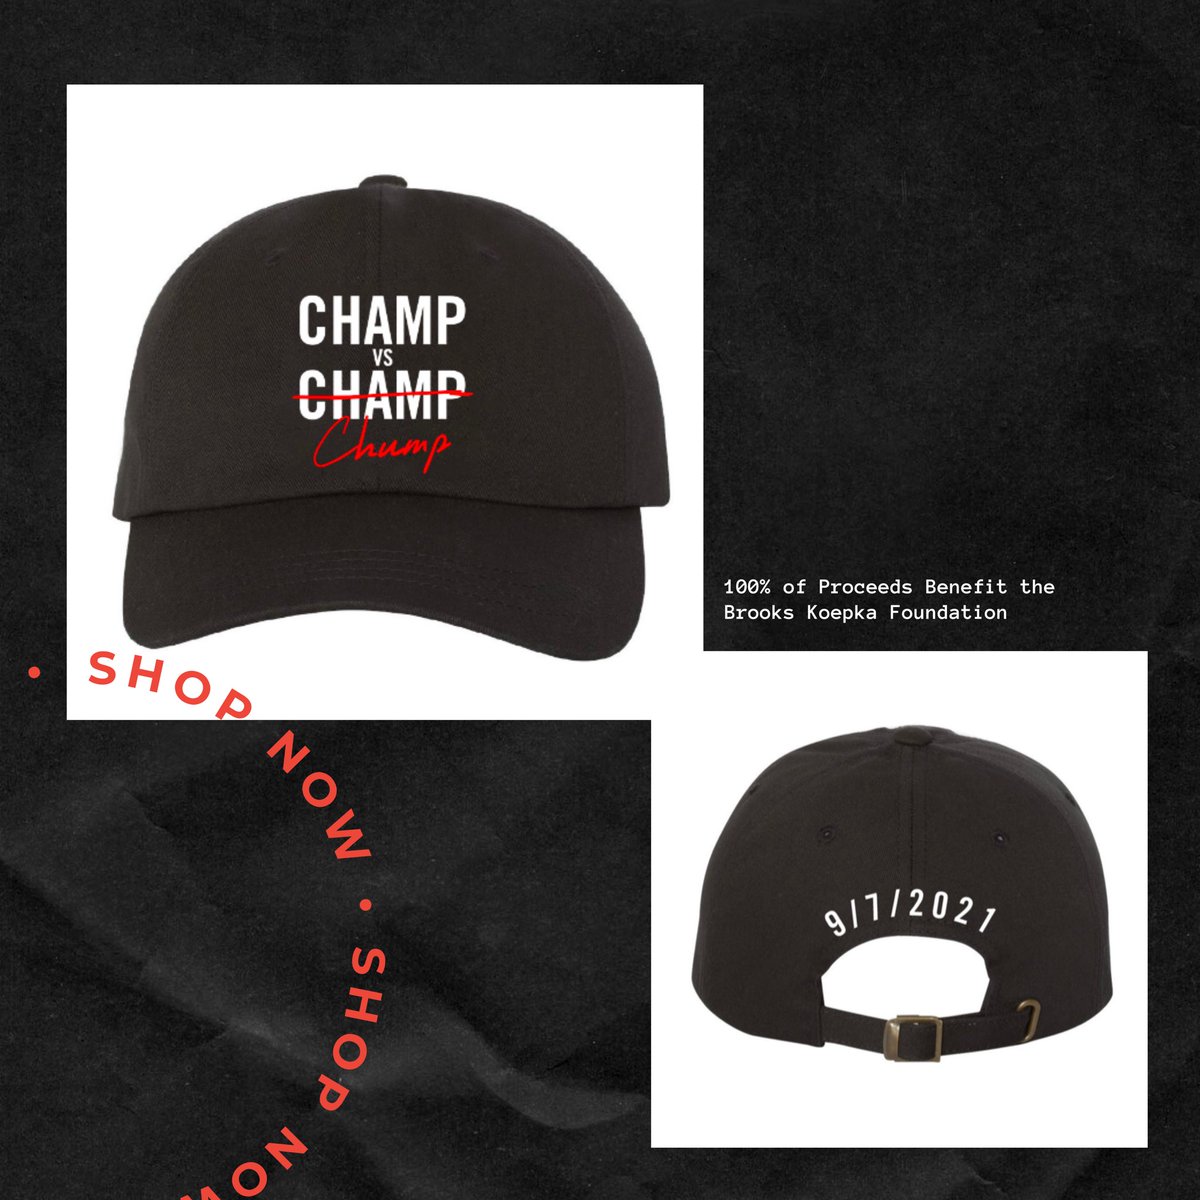 Support the champ @BKoepka as he beats the chump @stoolpresidente this Tuesday. Get your #ChampvsChump merch now on shop.BrooksKoepka.com